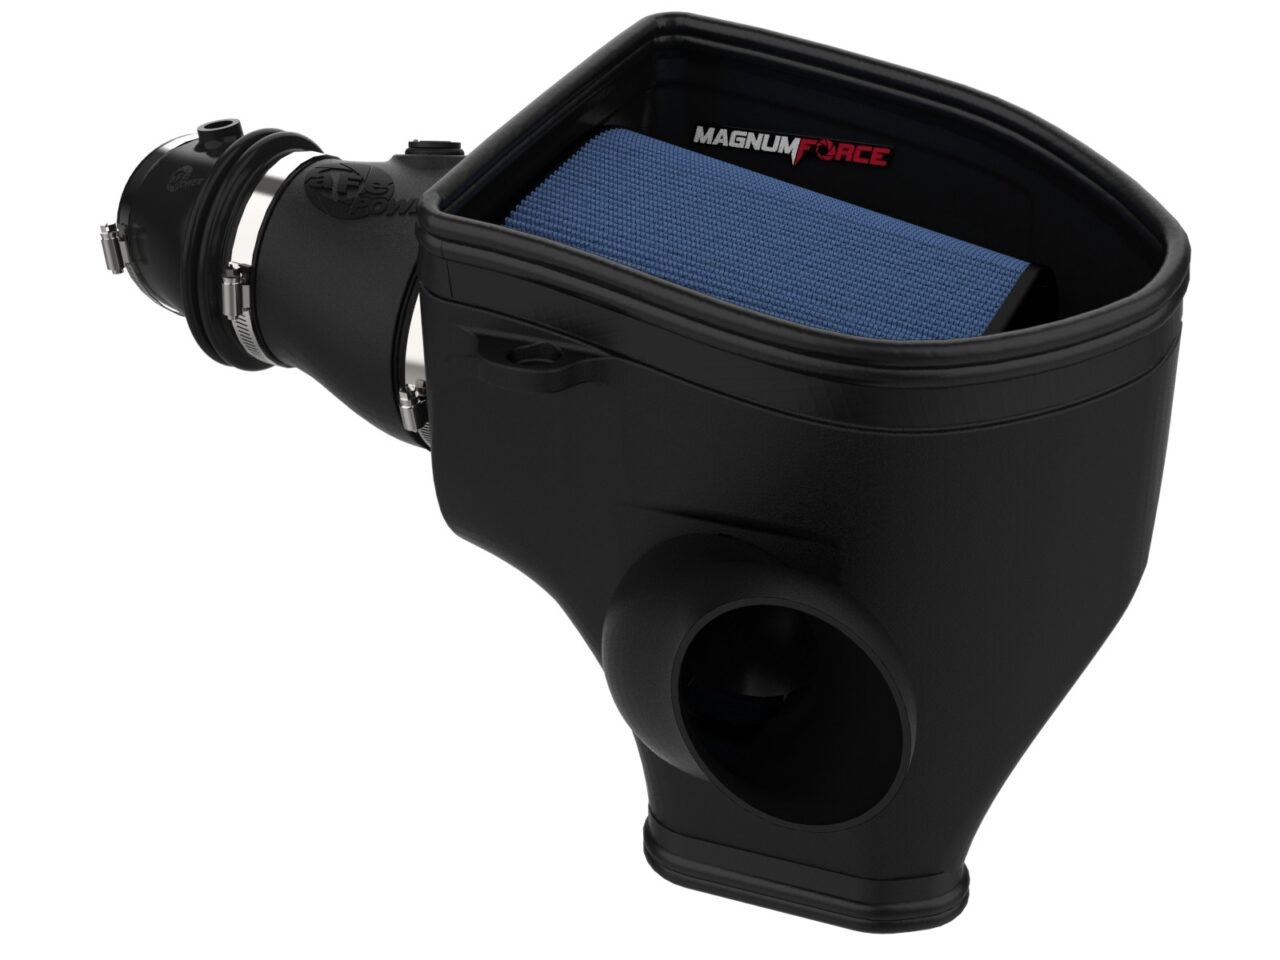 Black aFe POWER Aftermarket cold air intake with blue oiled filter for Hellcat engine on white background